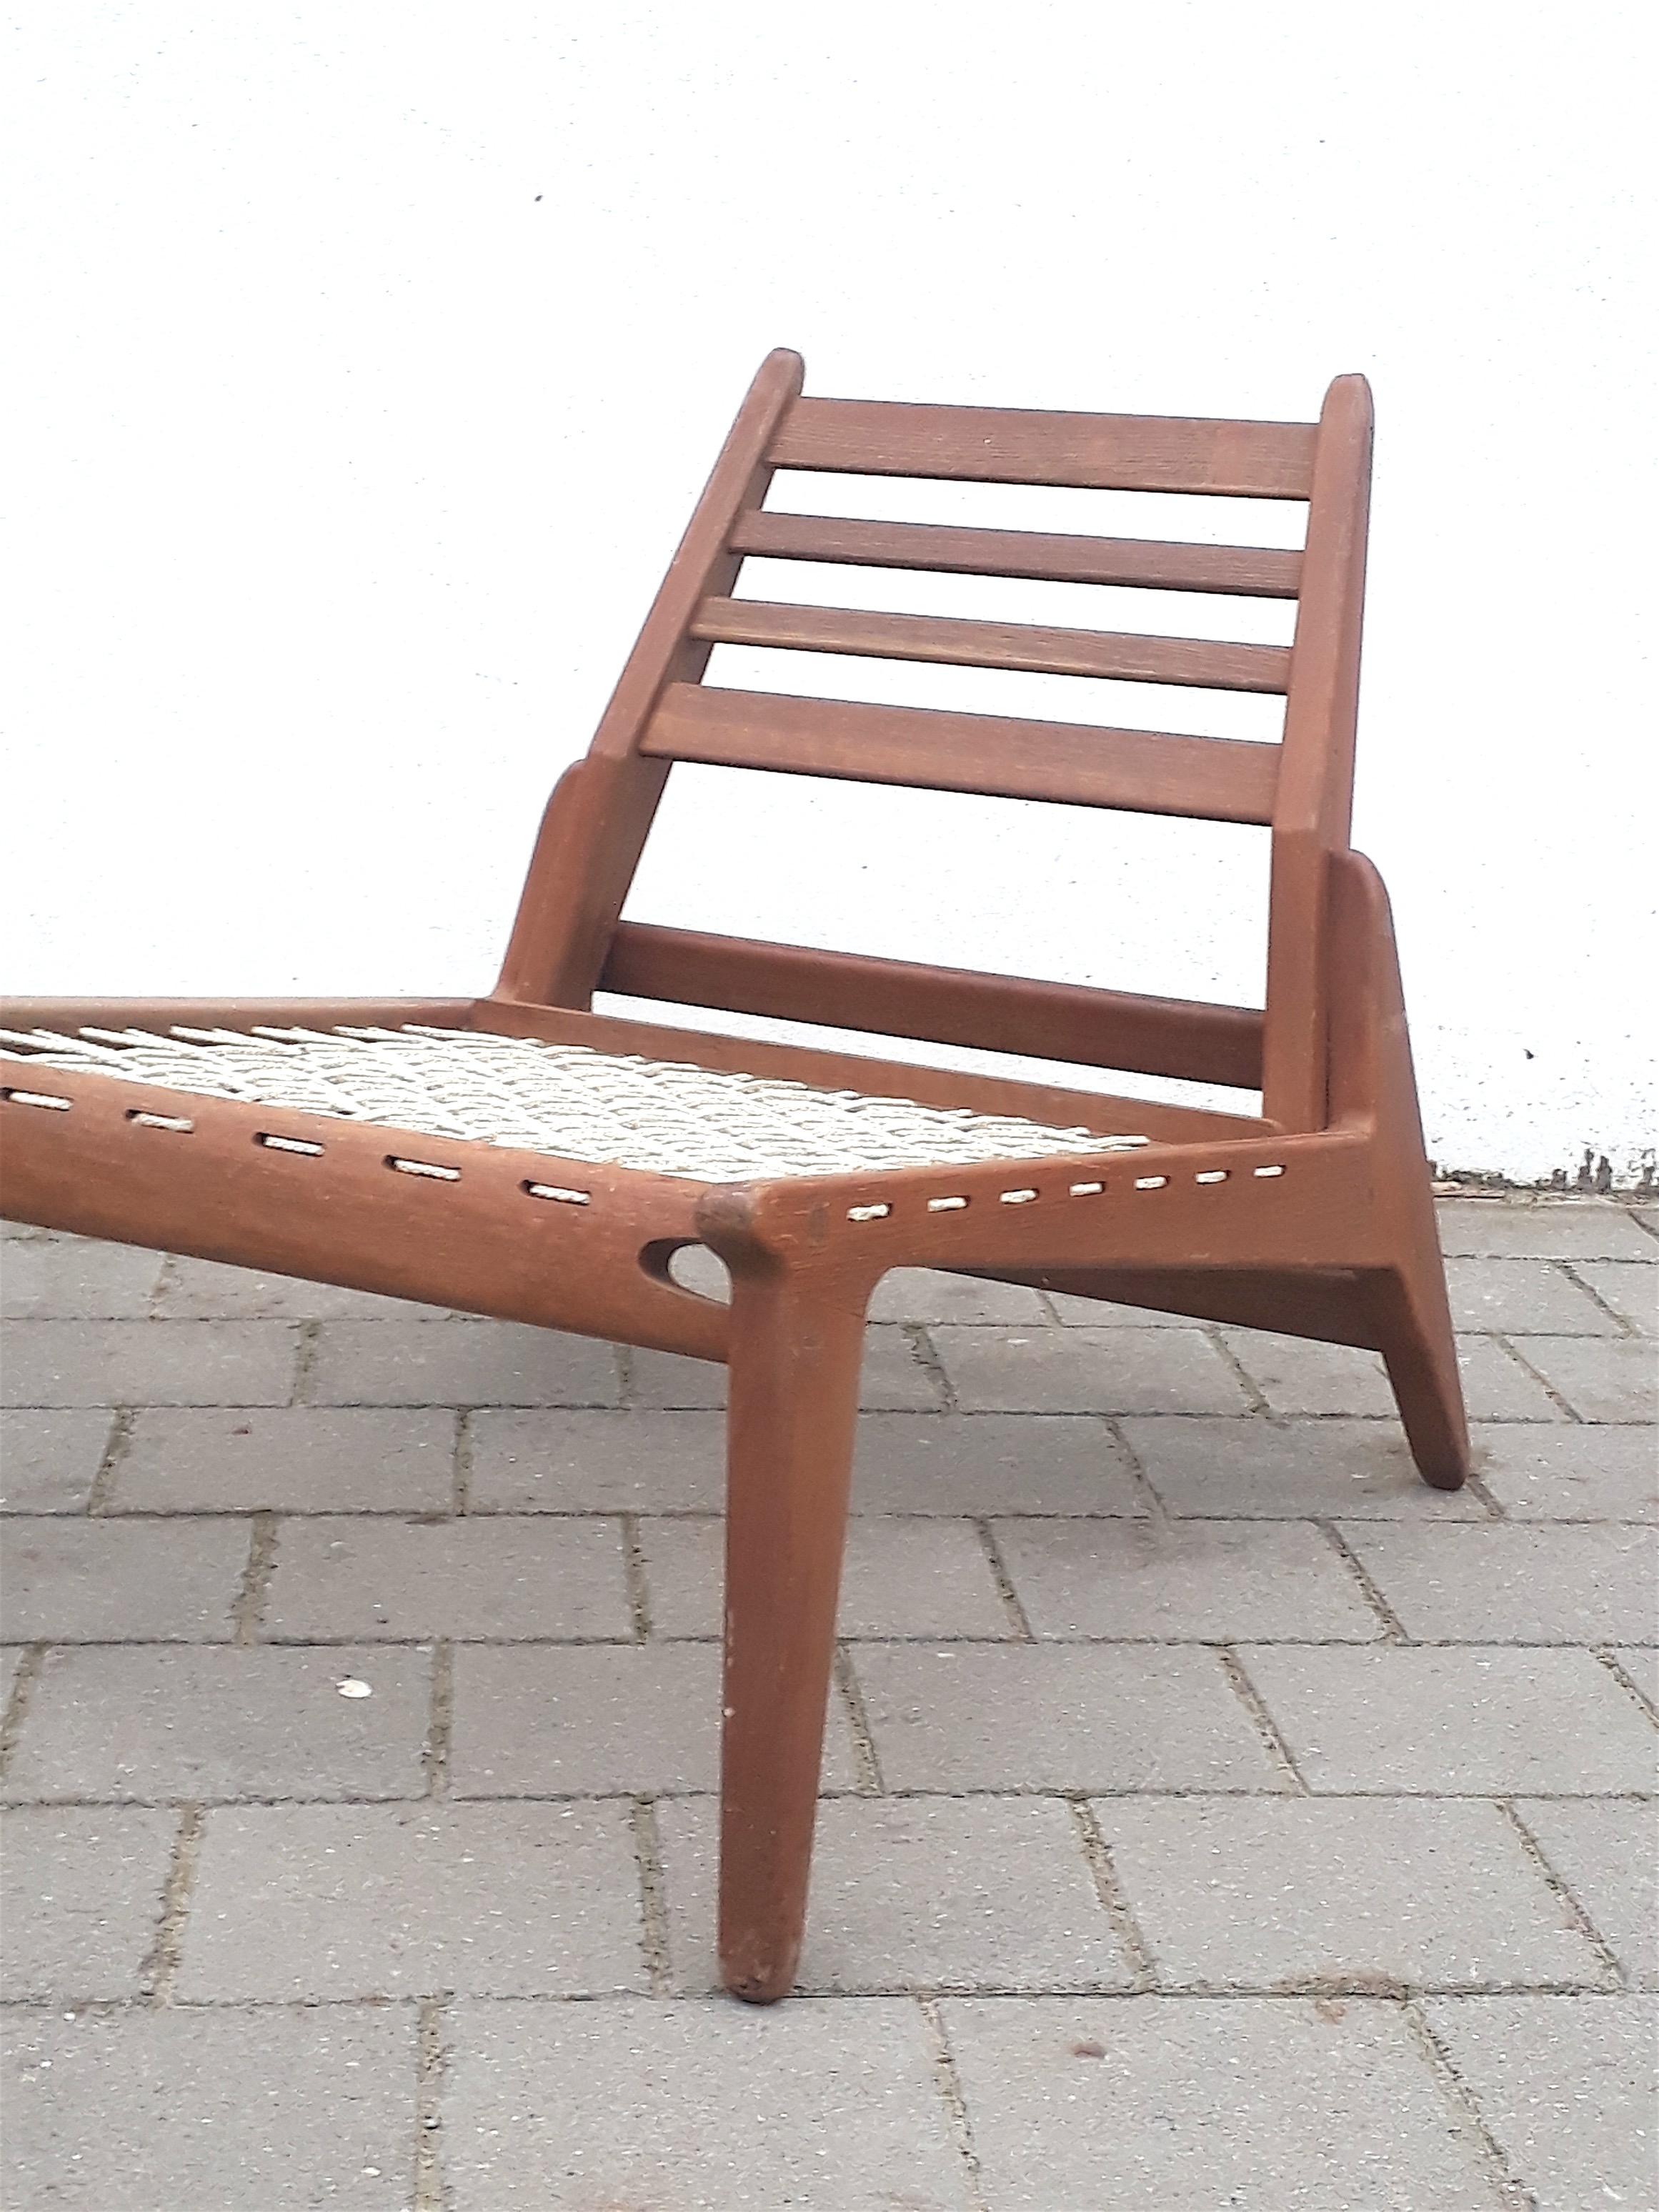 2 German Hunting Chairs Organic Teak Wood Attributed to Otto Frei, 1950s For Sale 6